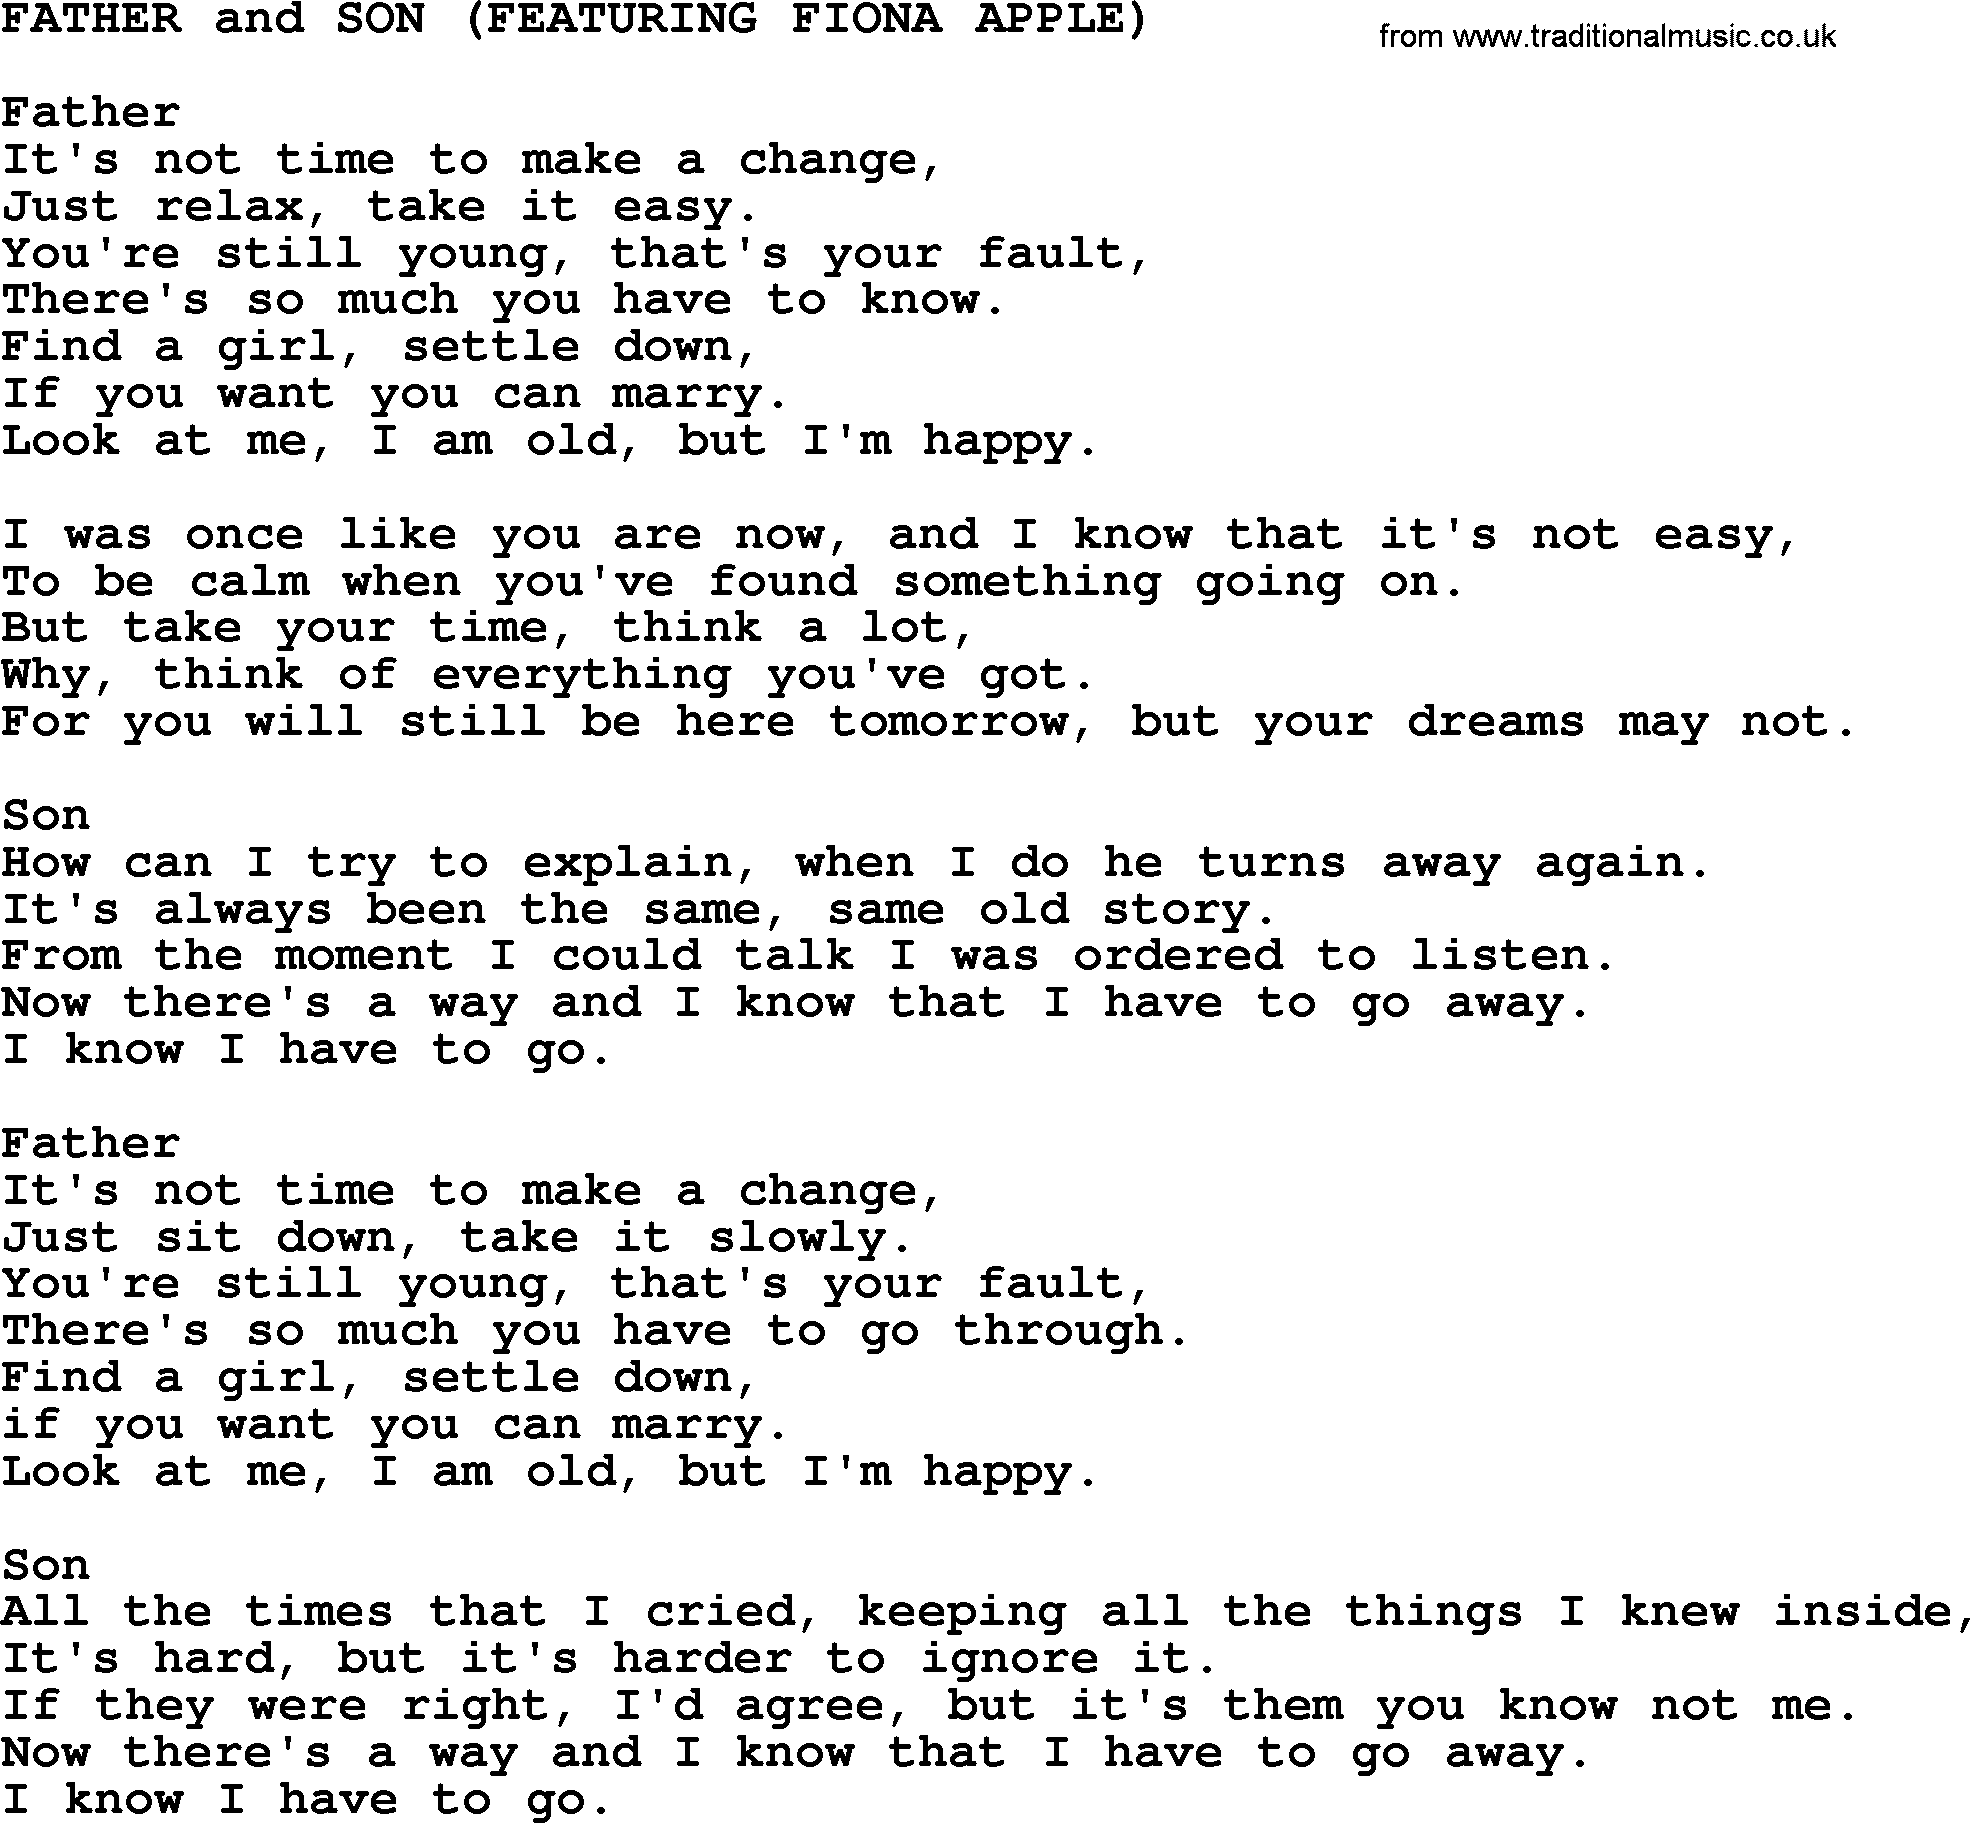 Johnny Cash song Father And Son.txt lyrics